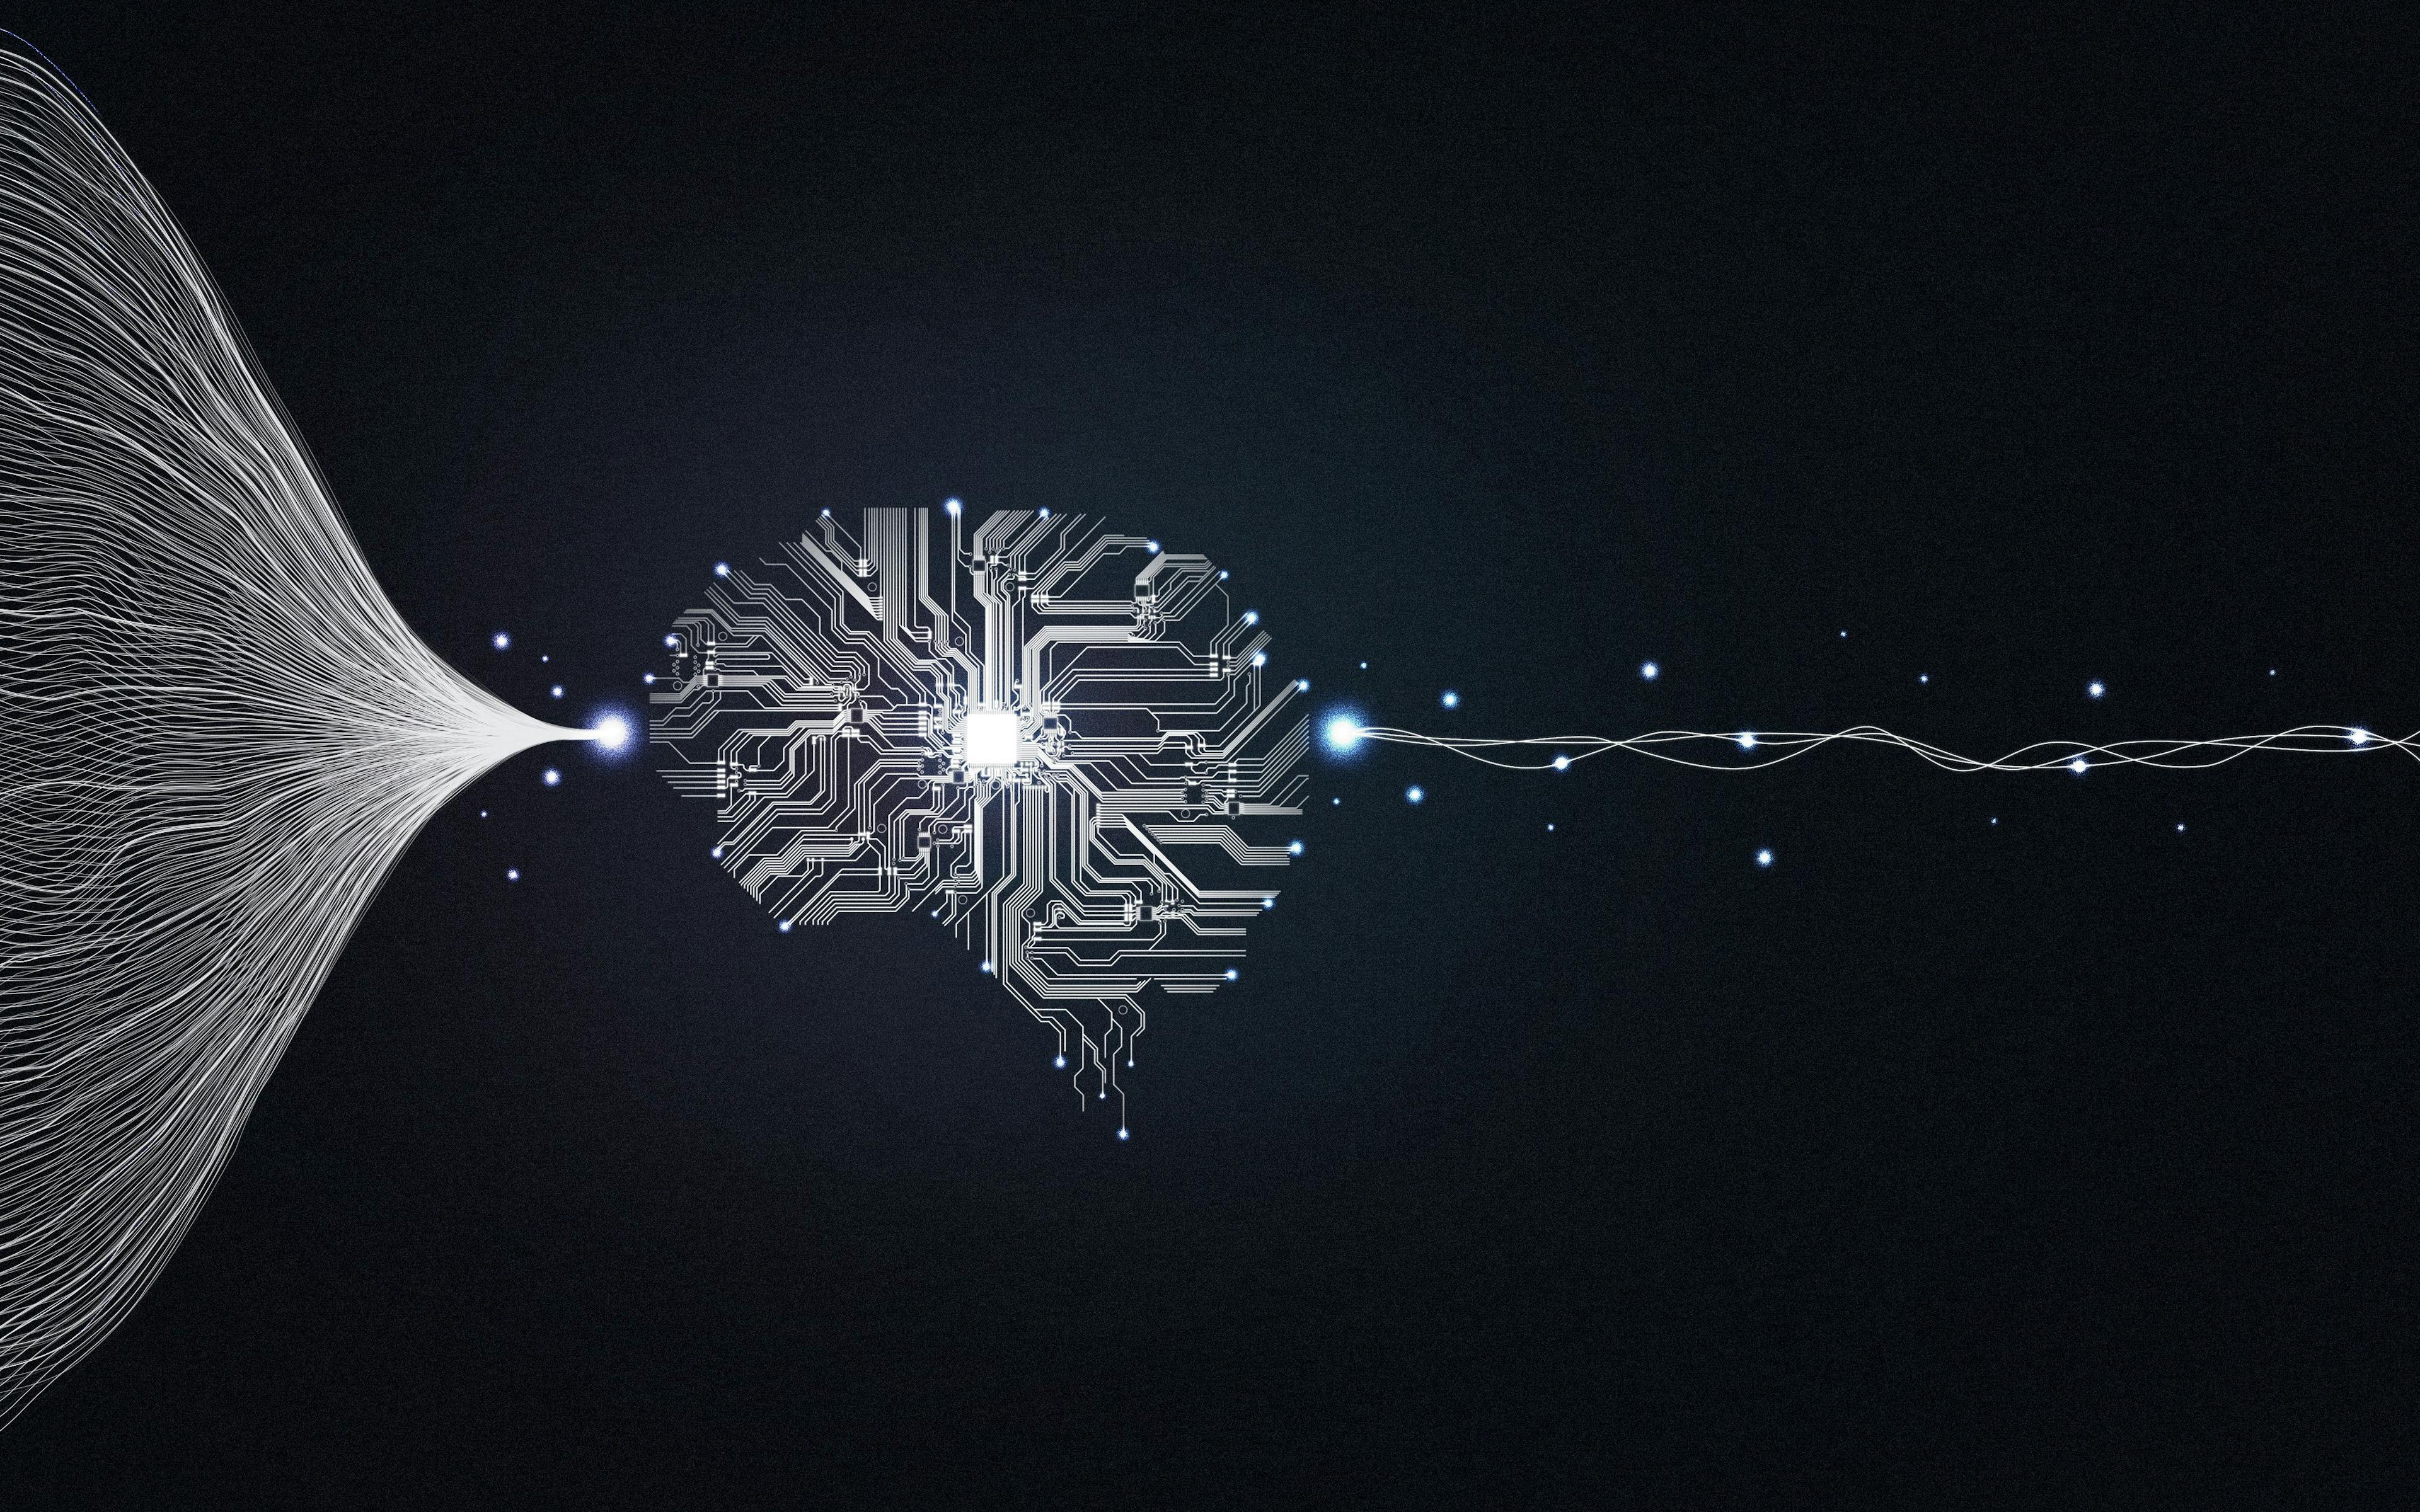 Big data and artificial intelligence concept. Machine learning and circuit board. Deep learning | Image Credit: © Lee - stock.adobe.com